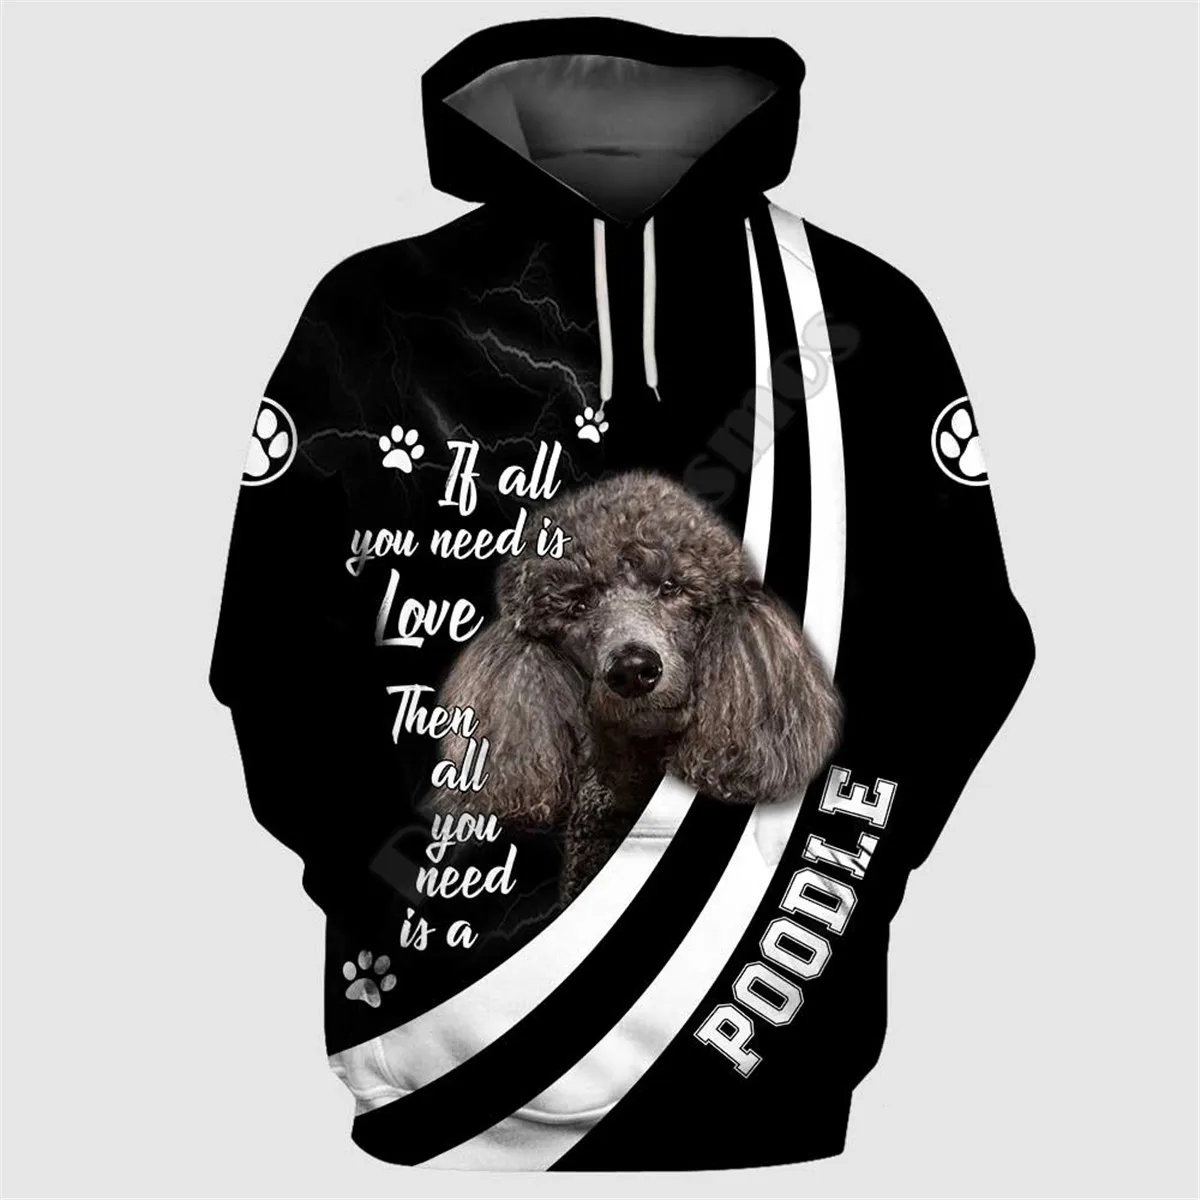 Poodle 3D Printed Hoodies Funny Pullover Men For Women Funny Sweatshirts Animal Sweater Drop Shipping 09 men suit set autumn clothing free shipping hoodies jogger pants set woman 2 pieces summer plus size sweatshirt pants supplier